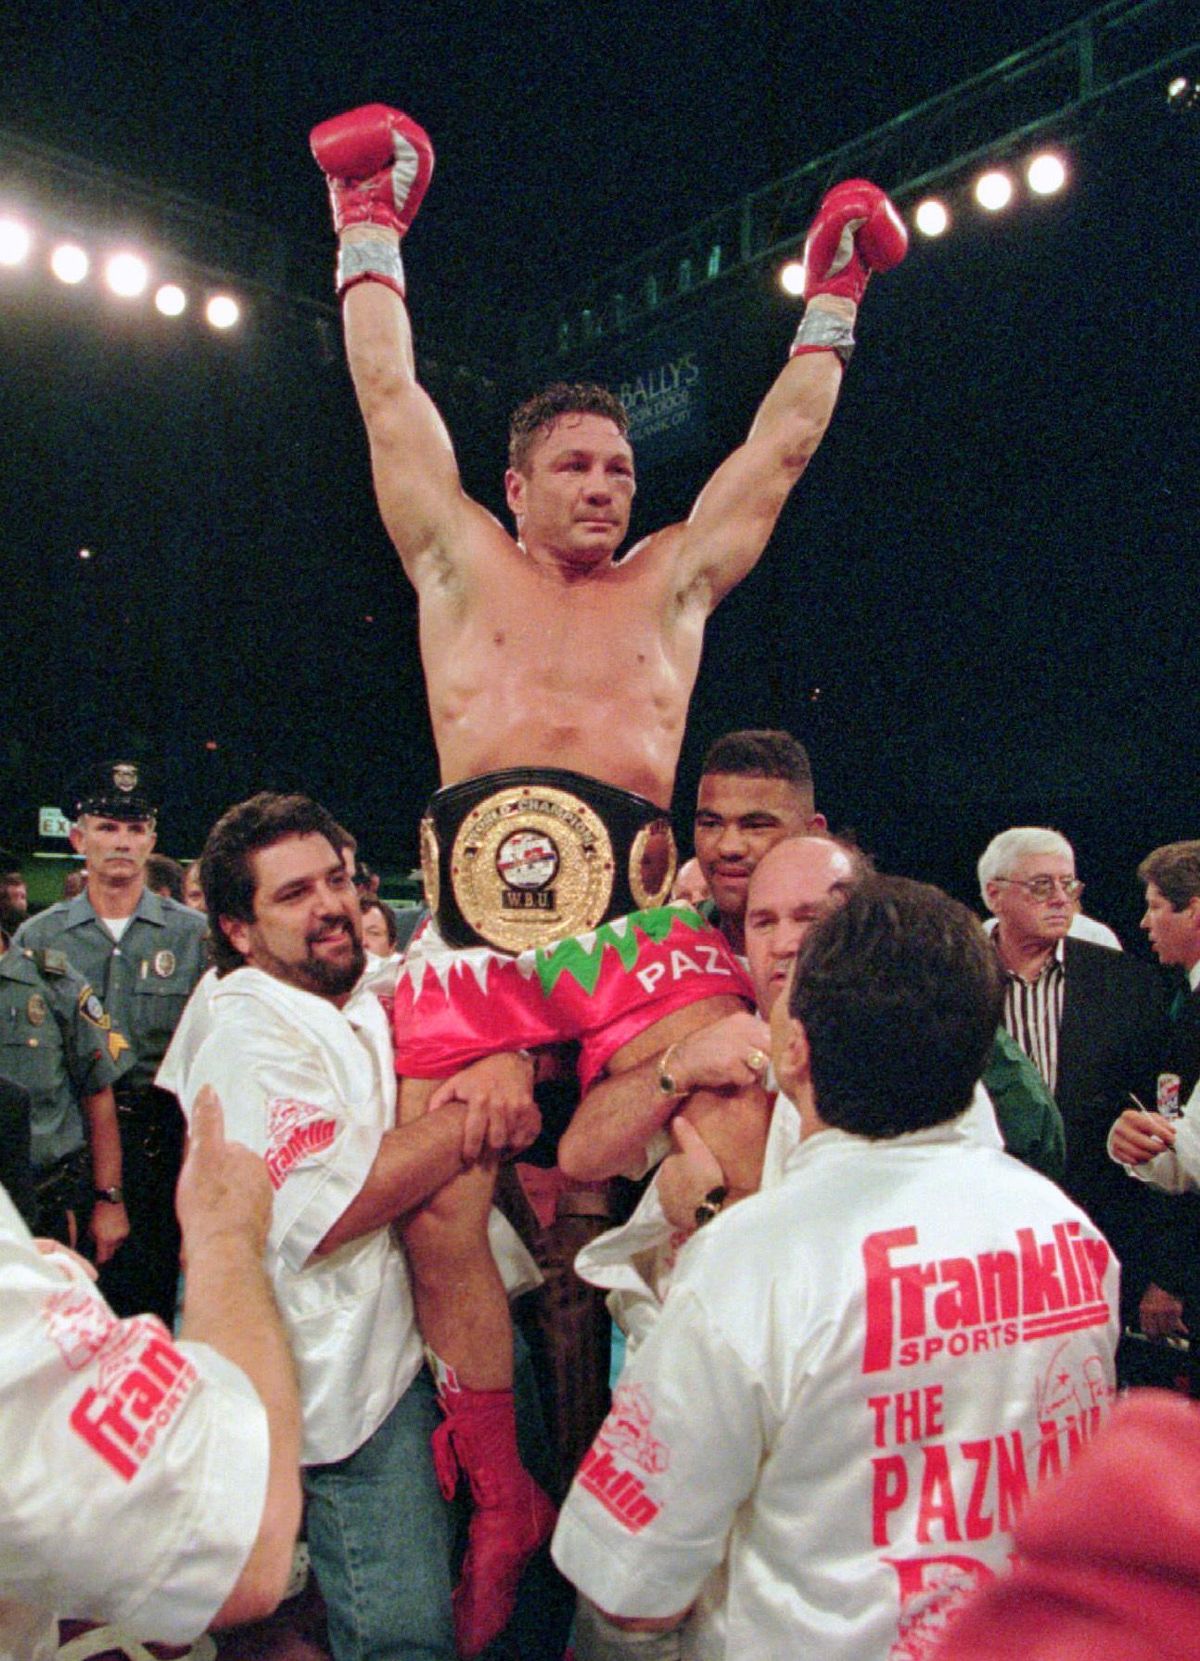 In this Aug. 23, 1996 file photo, boxer Vinny Paz, of Providence, R.I., is lifted up after winning a 12-round WBU super middleweight title bout against Dana Rosenblatt in Atlantic City, N.J. A new film, “Bleed For This,” based on Pazienza’s life, opened Friday. (BILL BORRELLI / Associated Press)